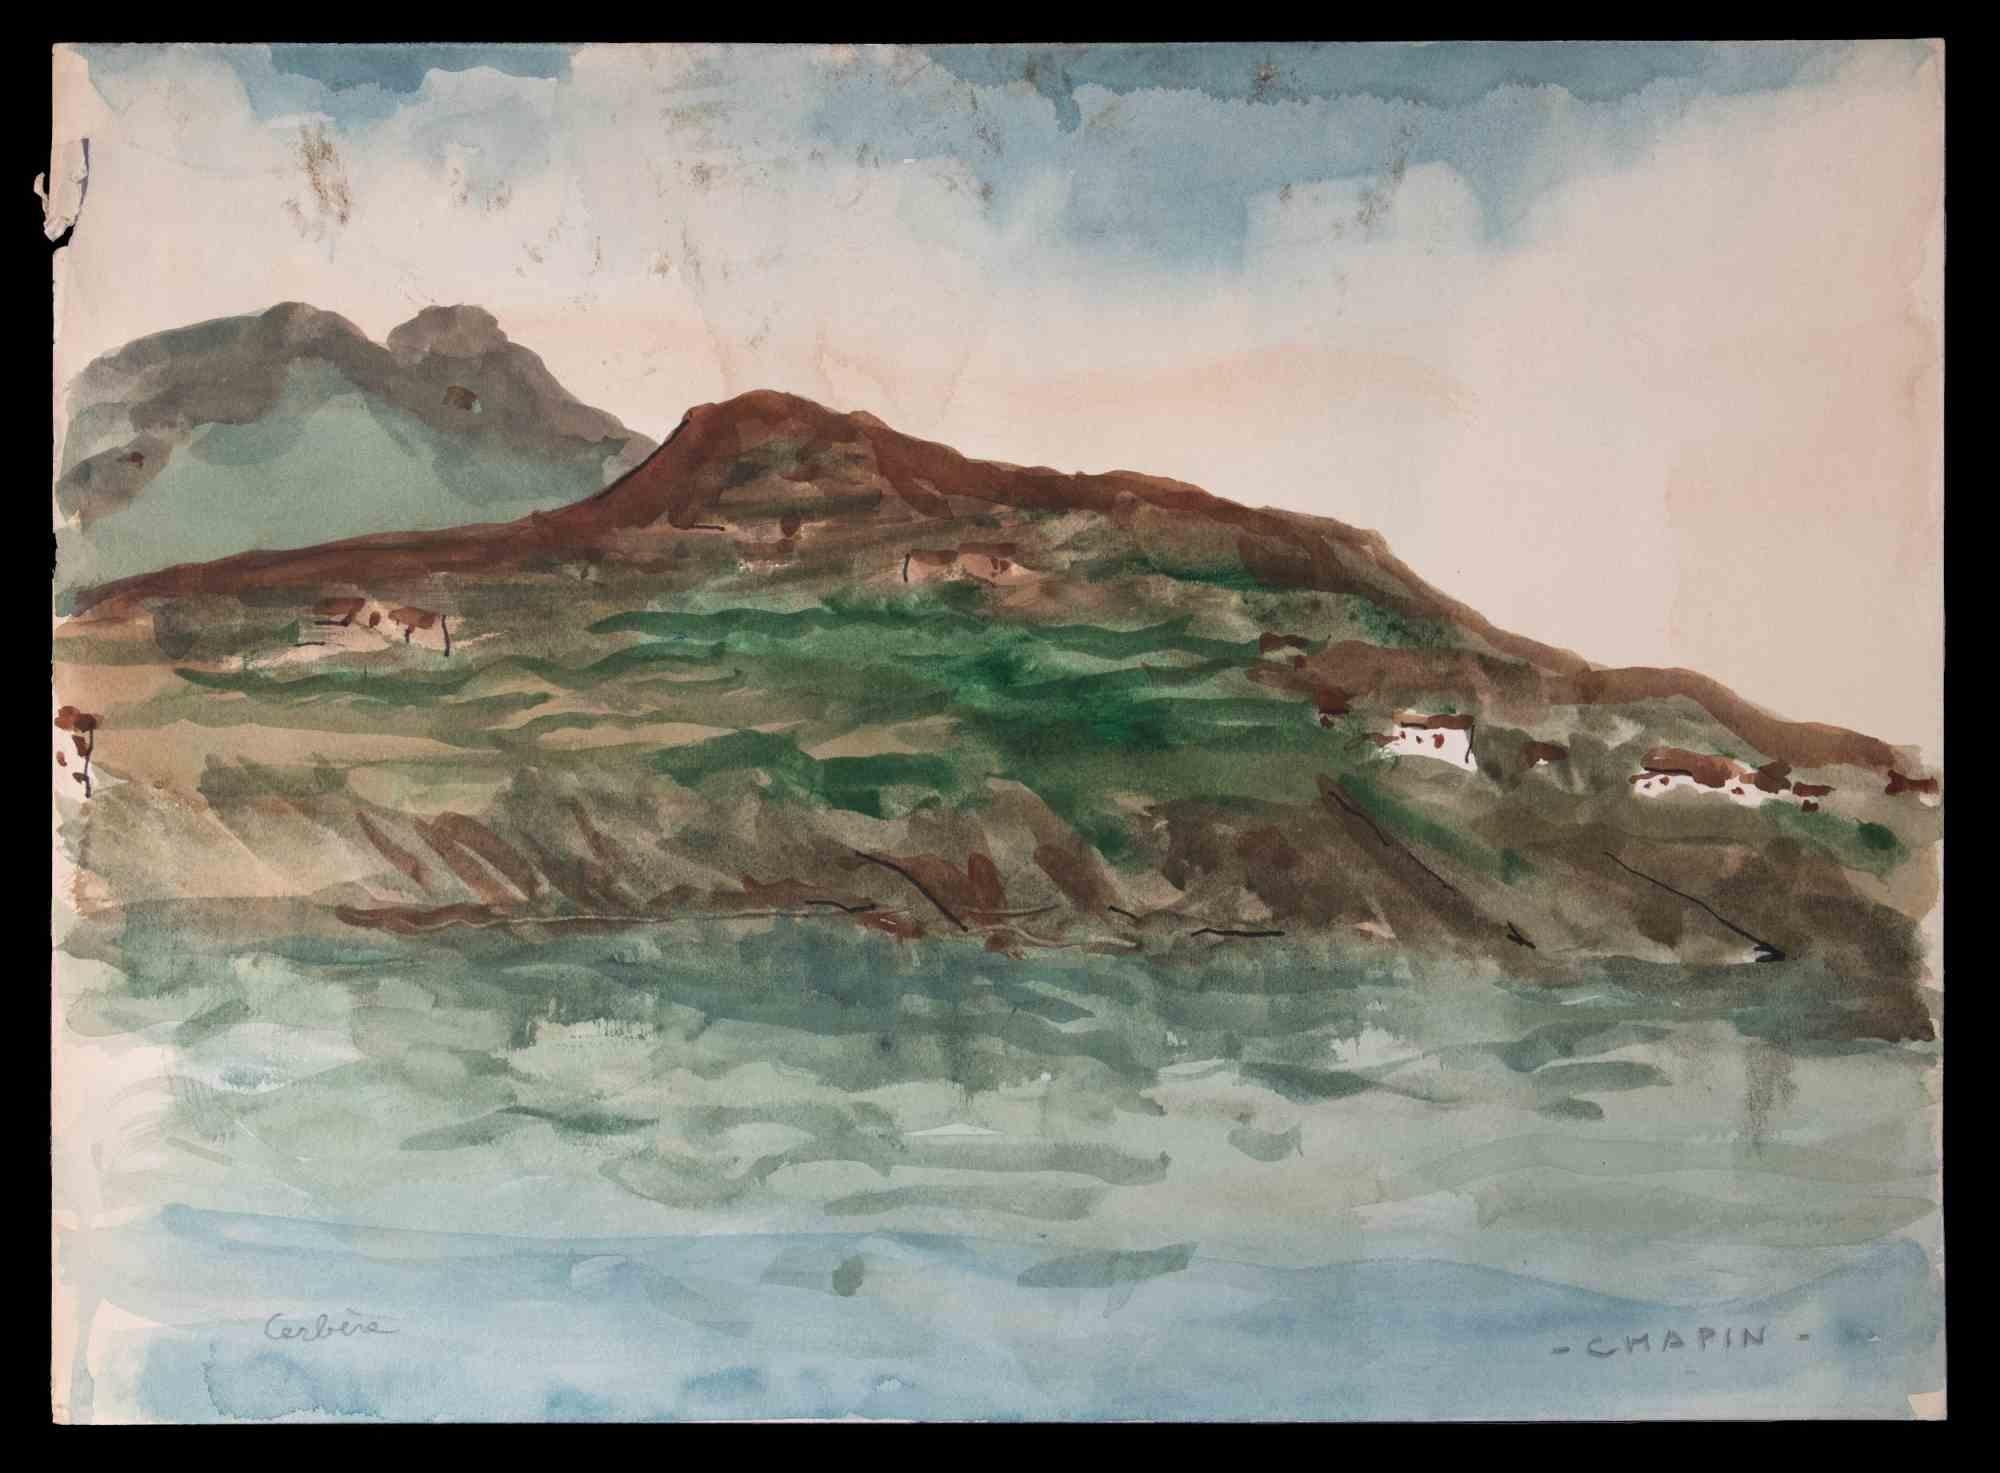 Cerbère is an ink and watercolor realized by Jean Chapin during the mid-20th century. 

Hand signed on the lower right margin and titled "Cerbère" on the lower left margin.

Good conditions.

Jean Chapin is a French painter and lithographer born on